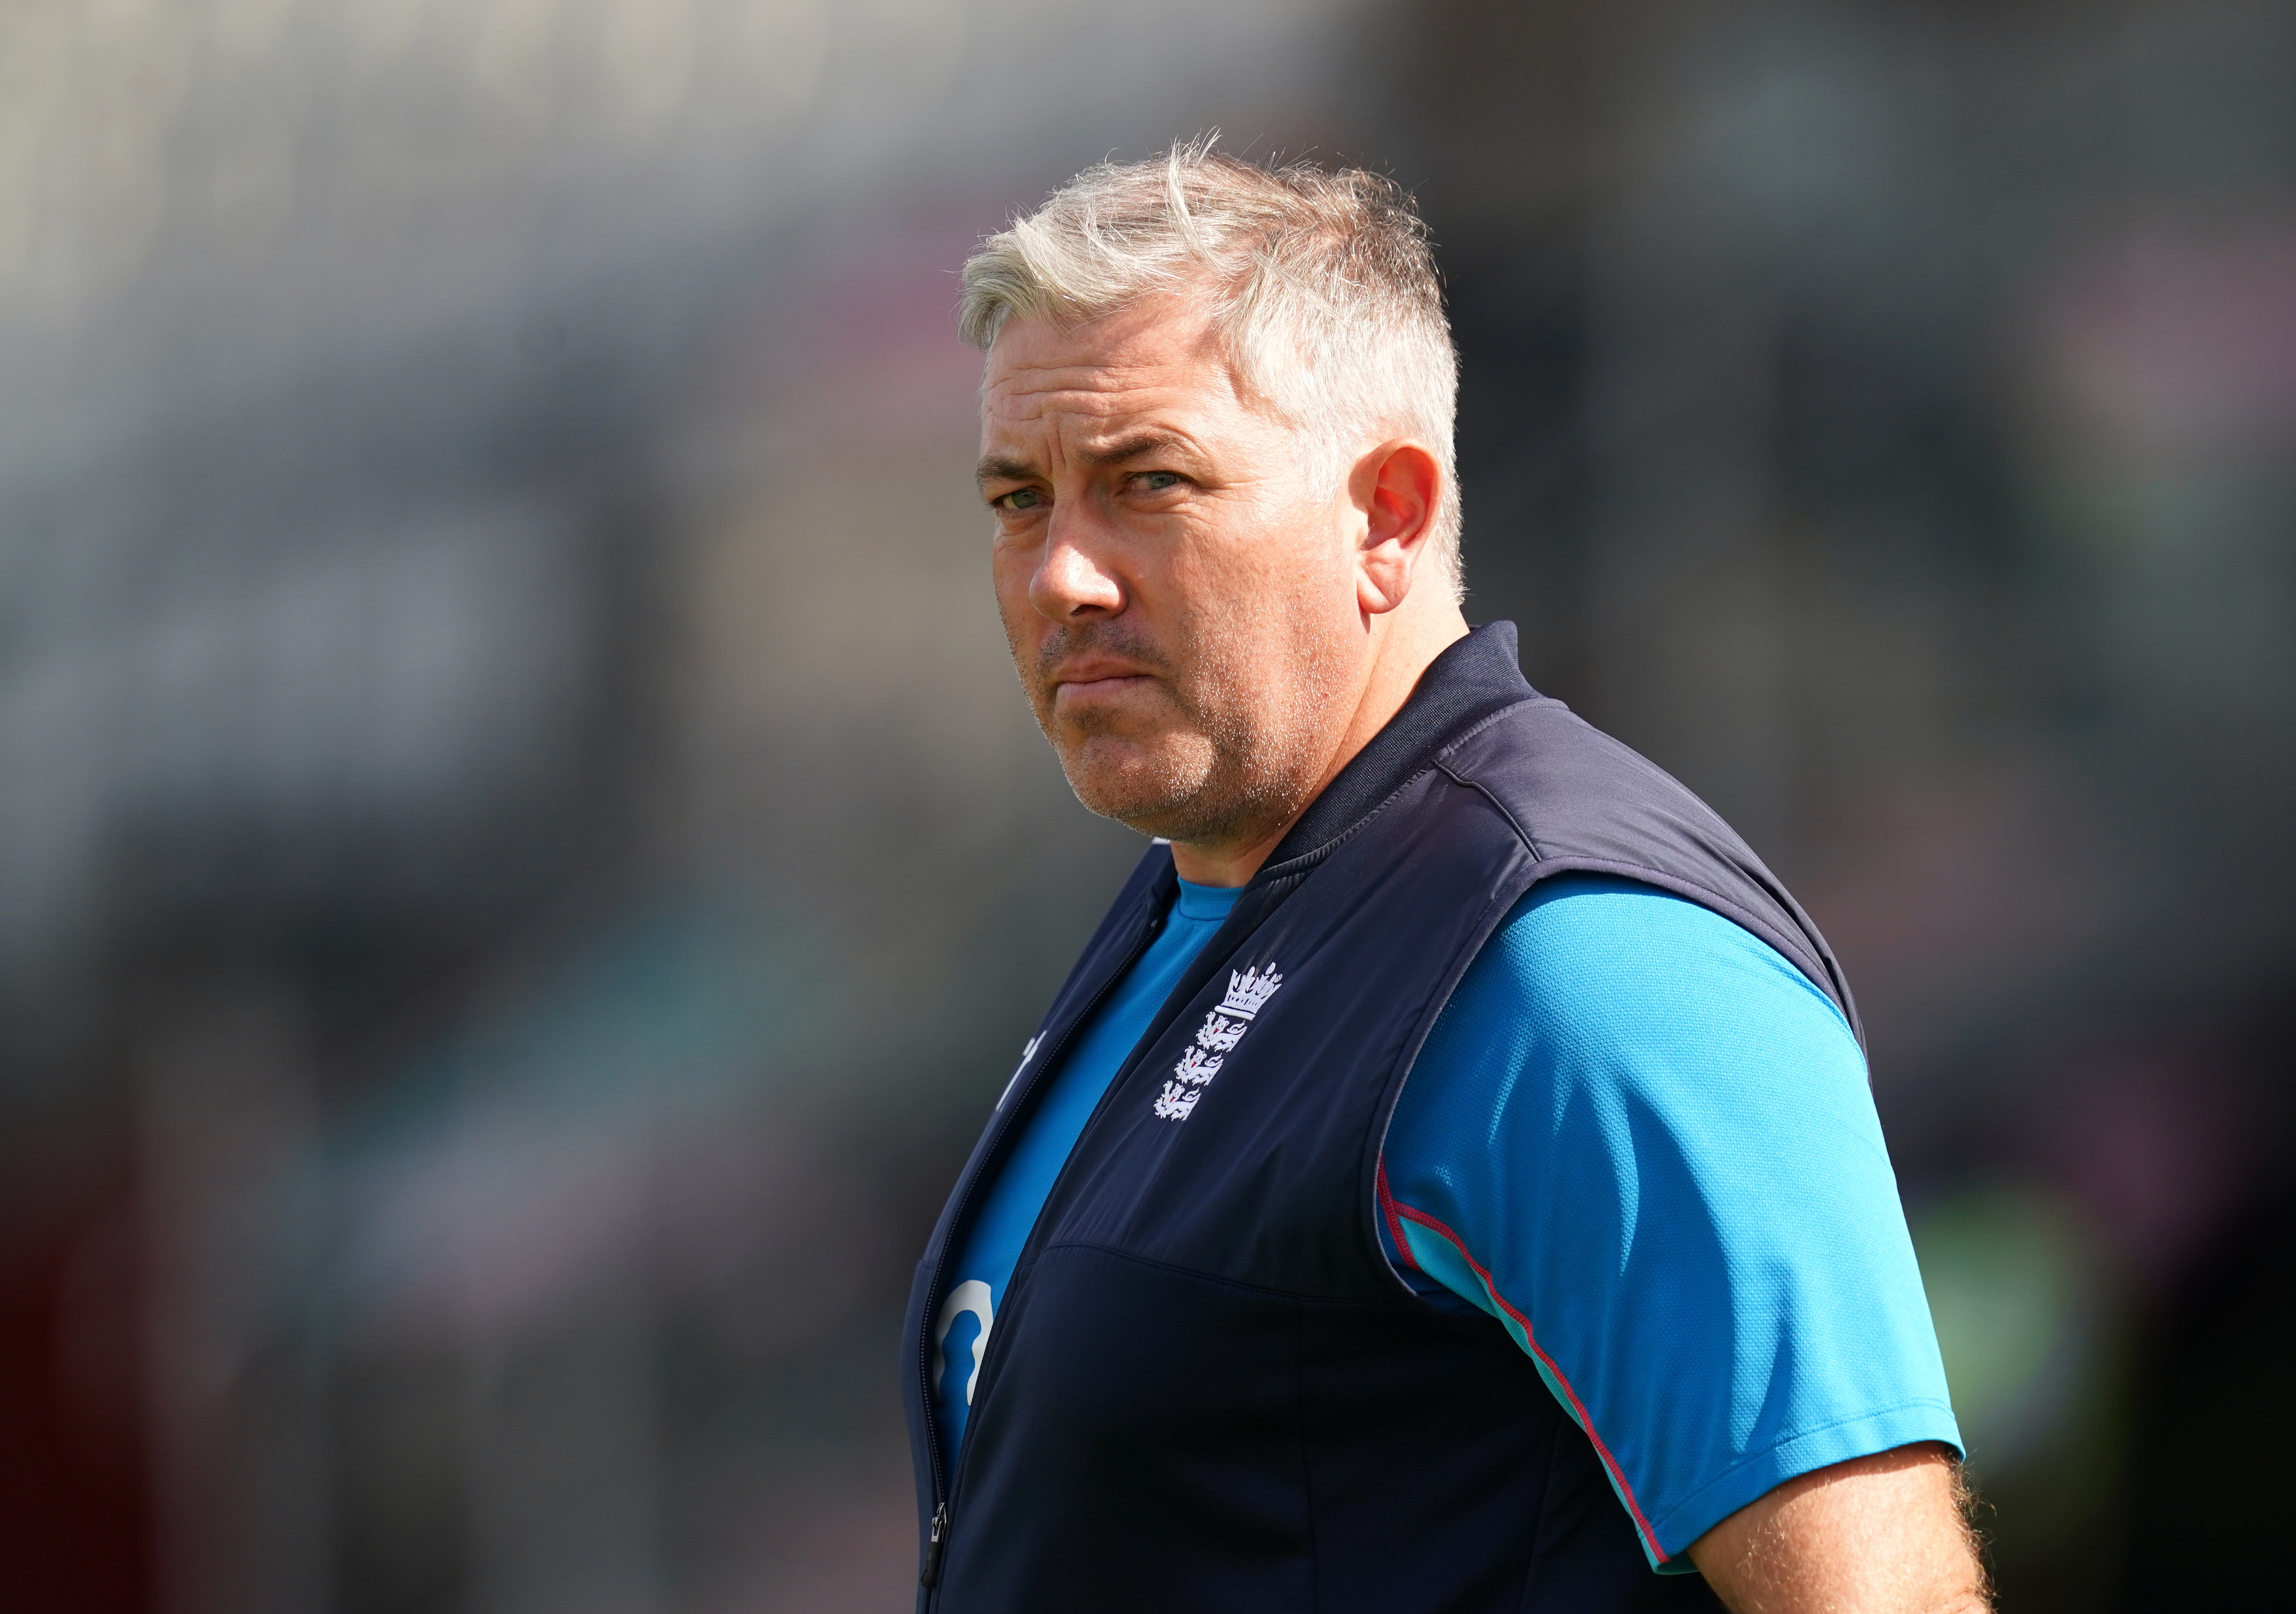 Chris Silverwood left his role as head coach of England earlier this week (Martin Rickett/PA)